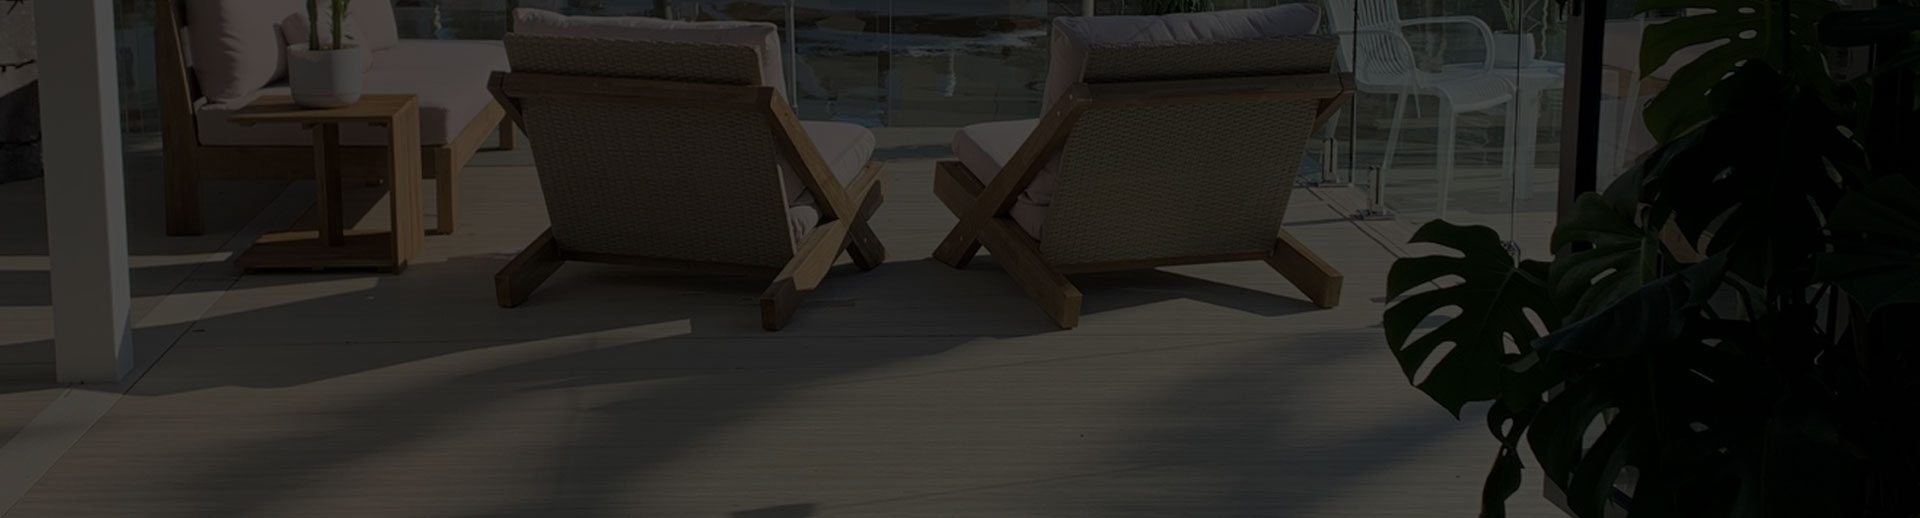 Commercial Use of Wood Plastic Composite Products